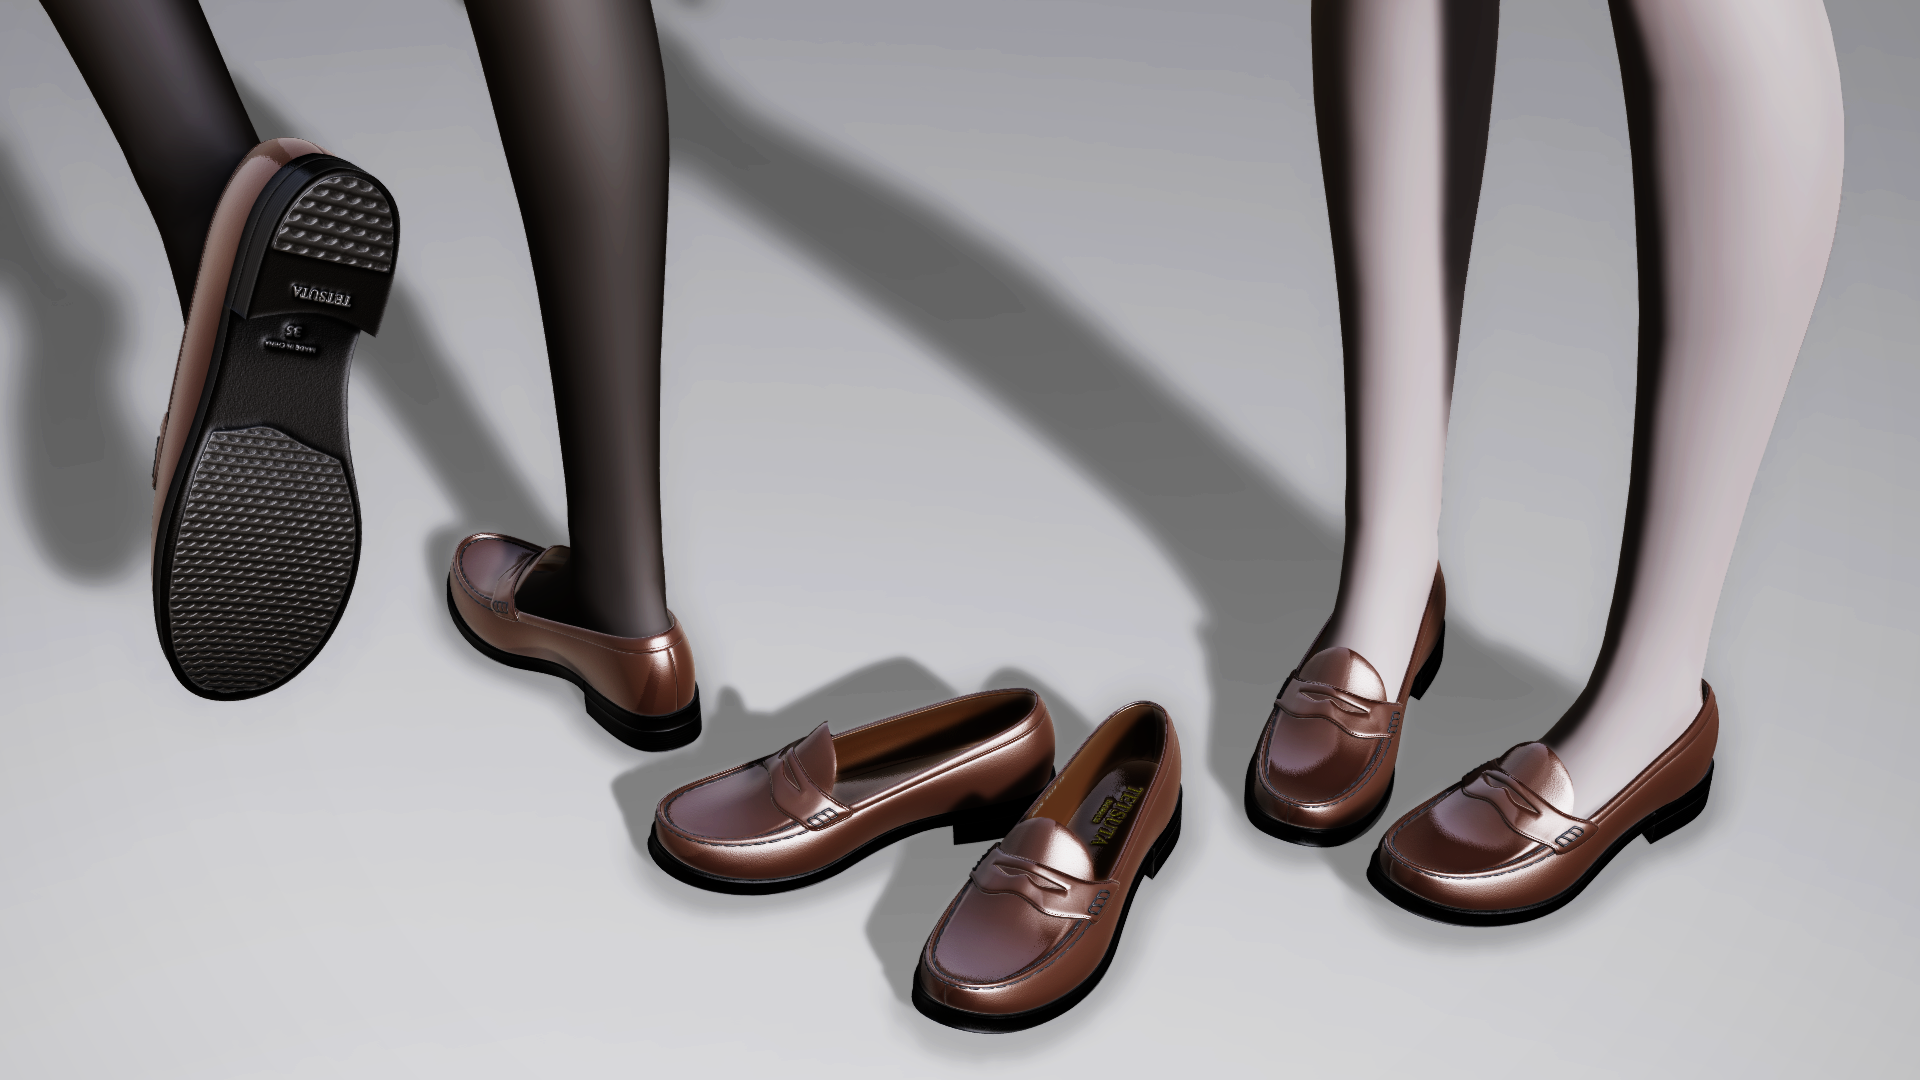 DL] MMD High School Girl Loafers [MMD Shoes] by iRon0129 on DeviantArt